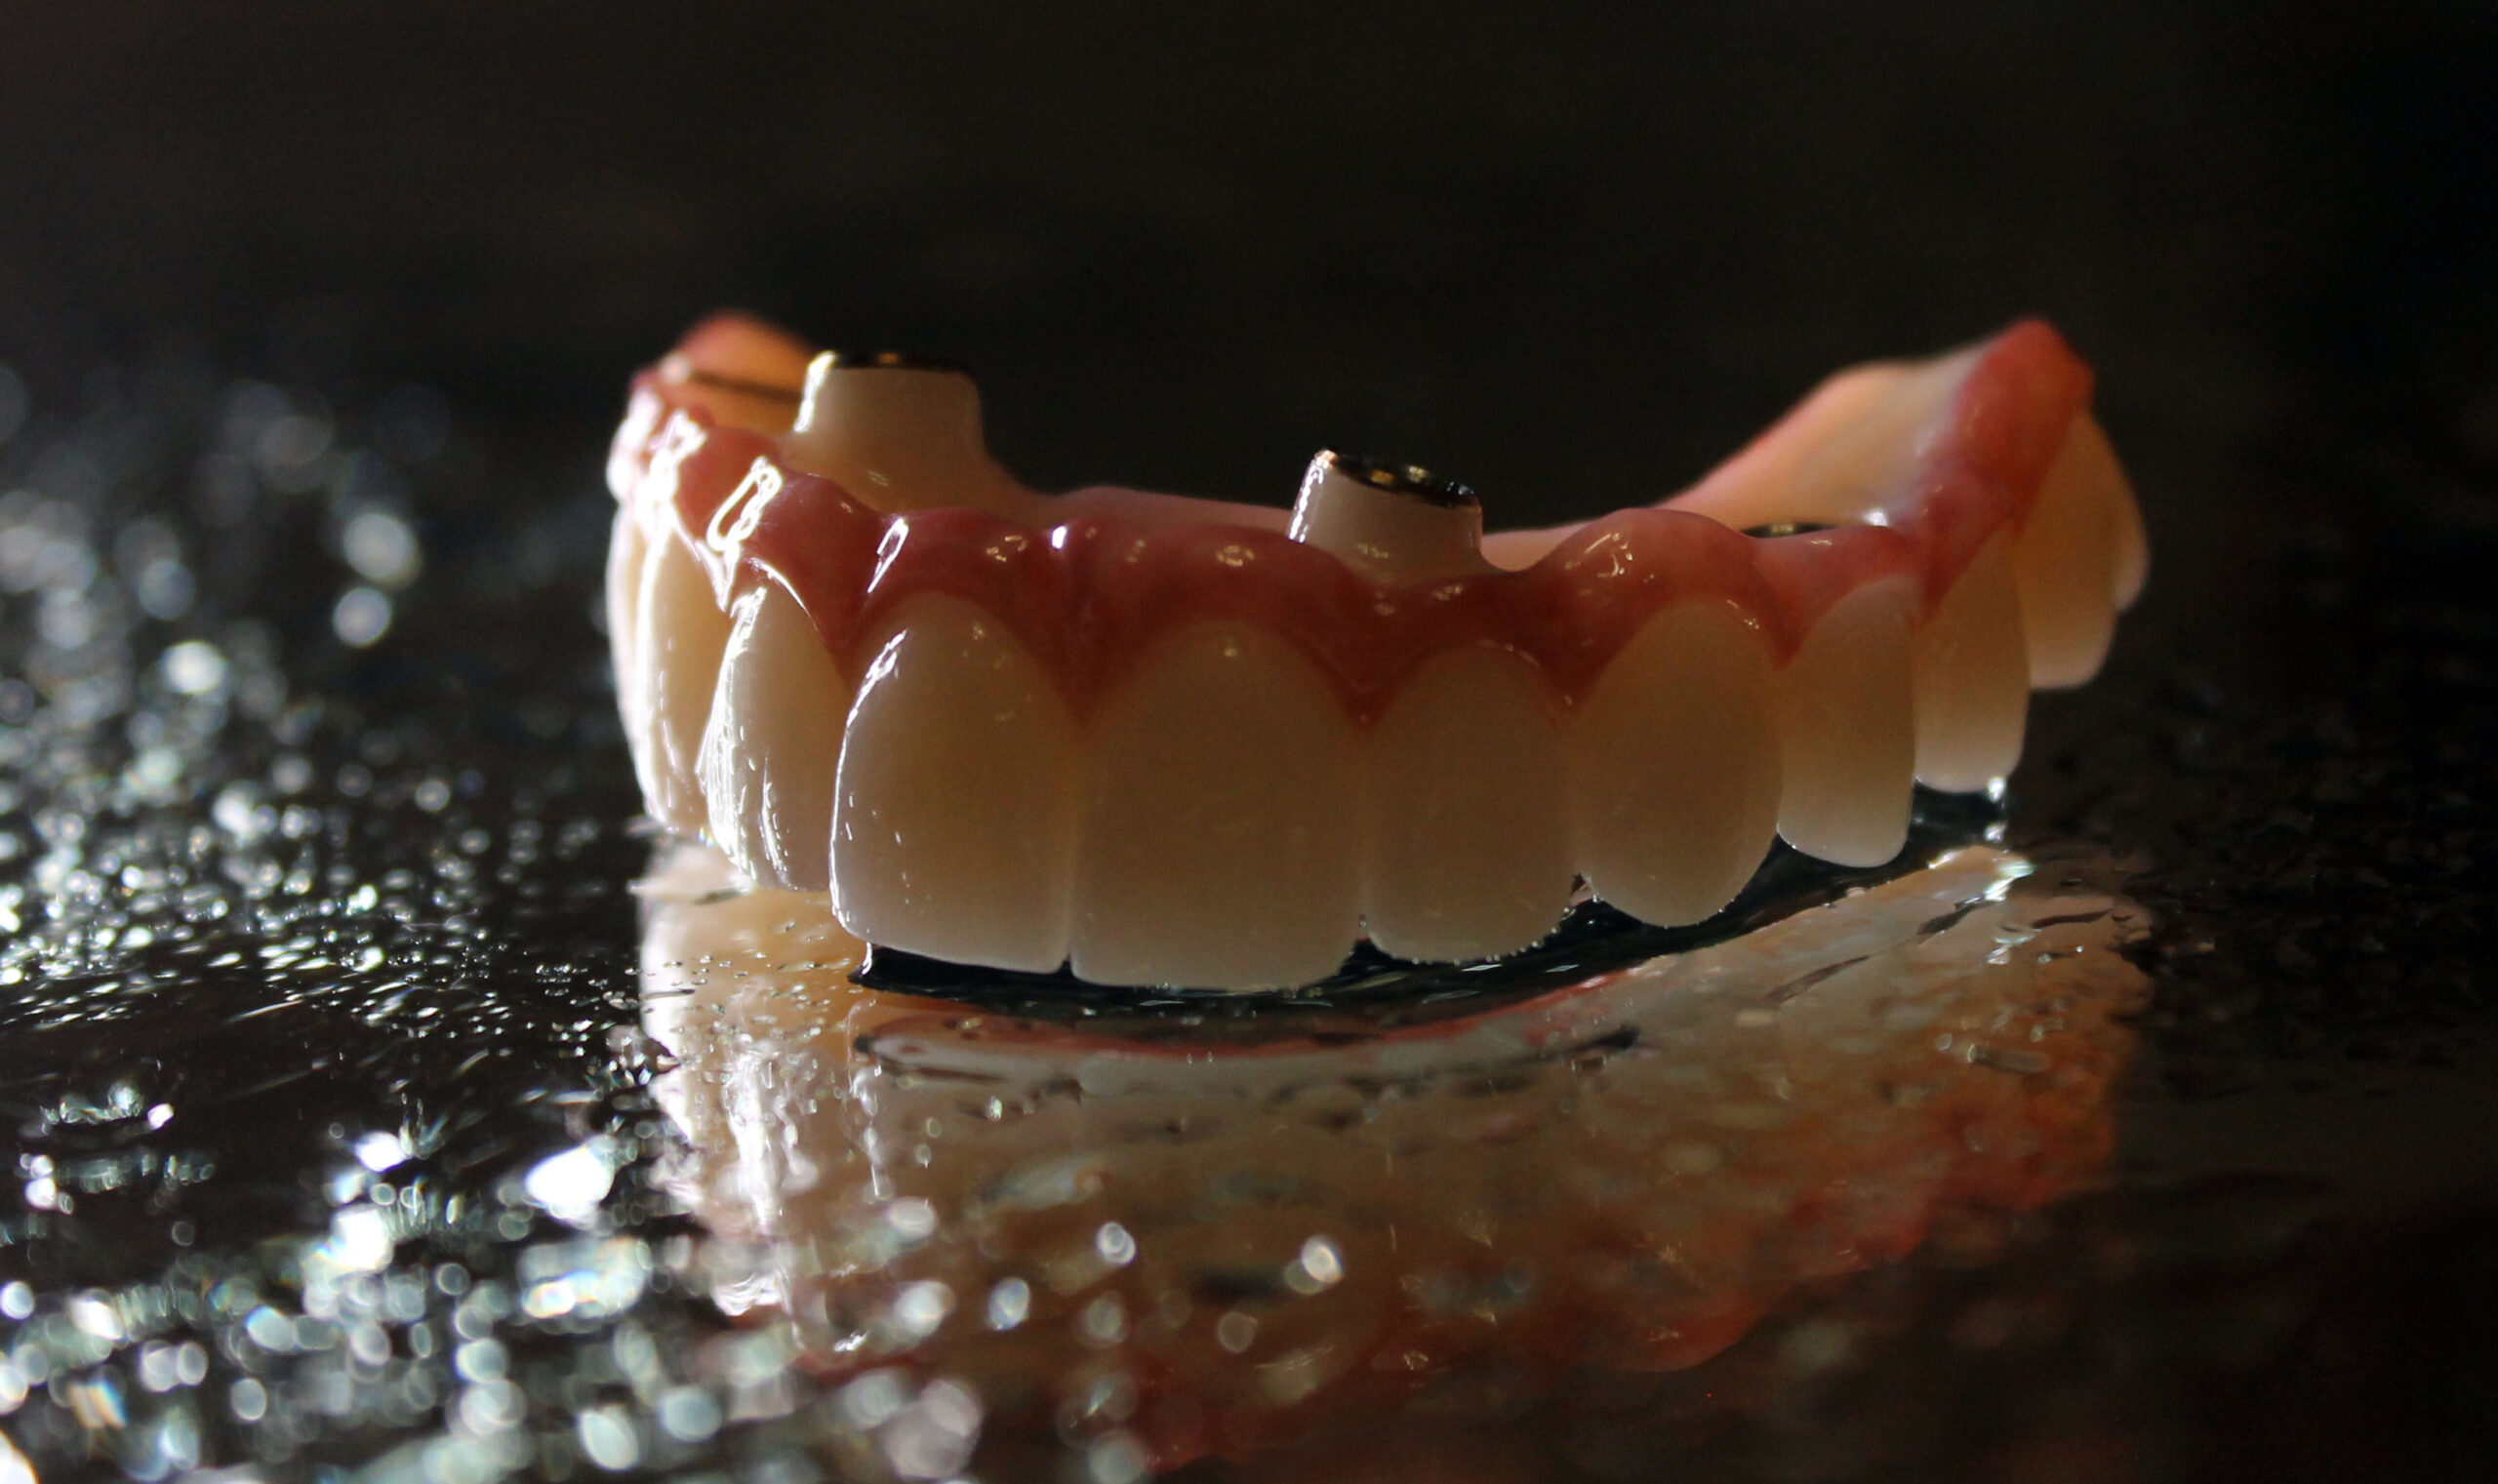 Am I Able To Get A Zirconia Prosthesis For My Full Arch Dental Implants In Oregon City, OR?